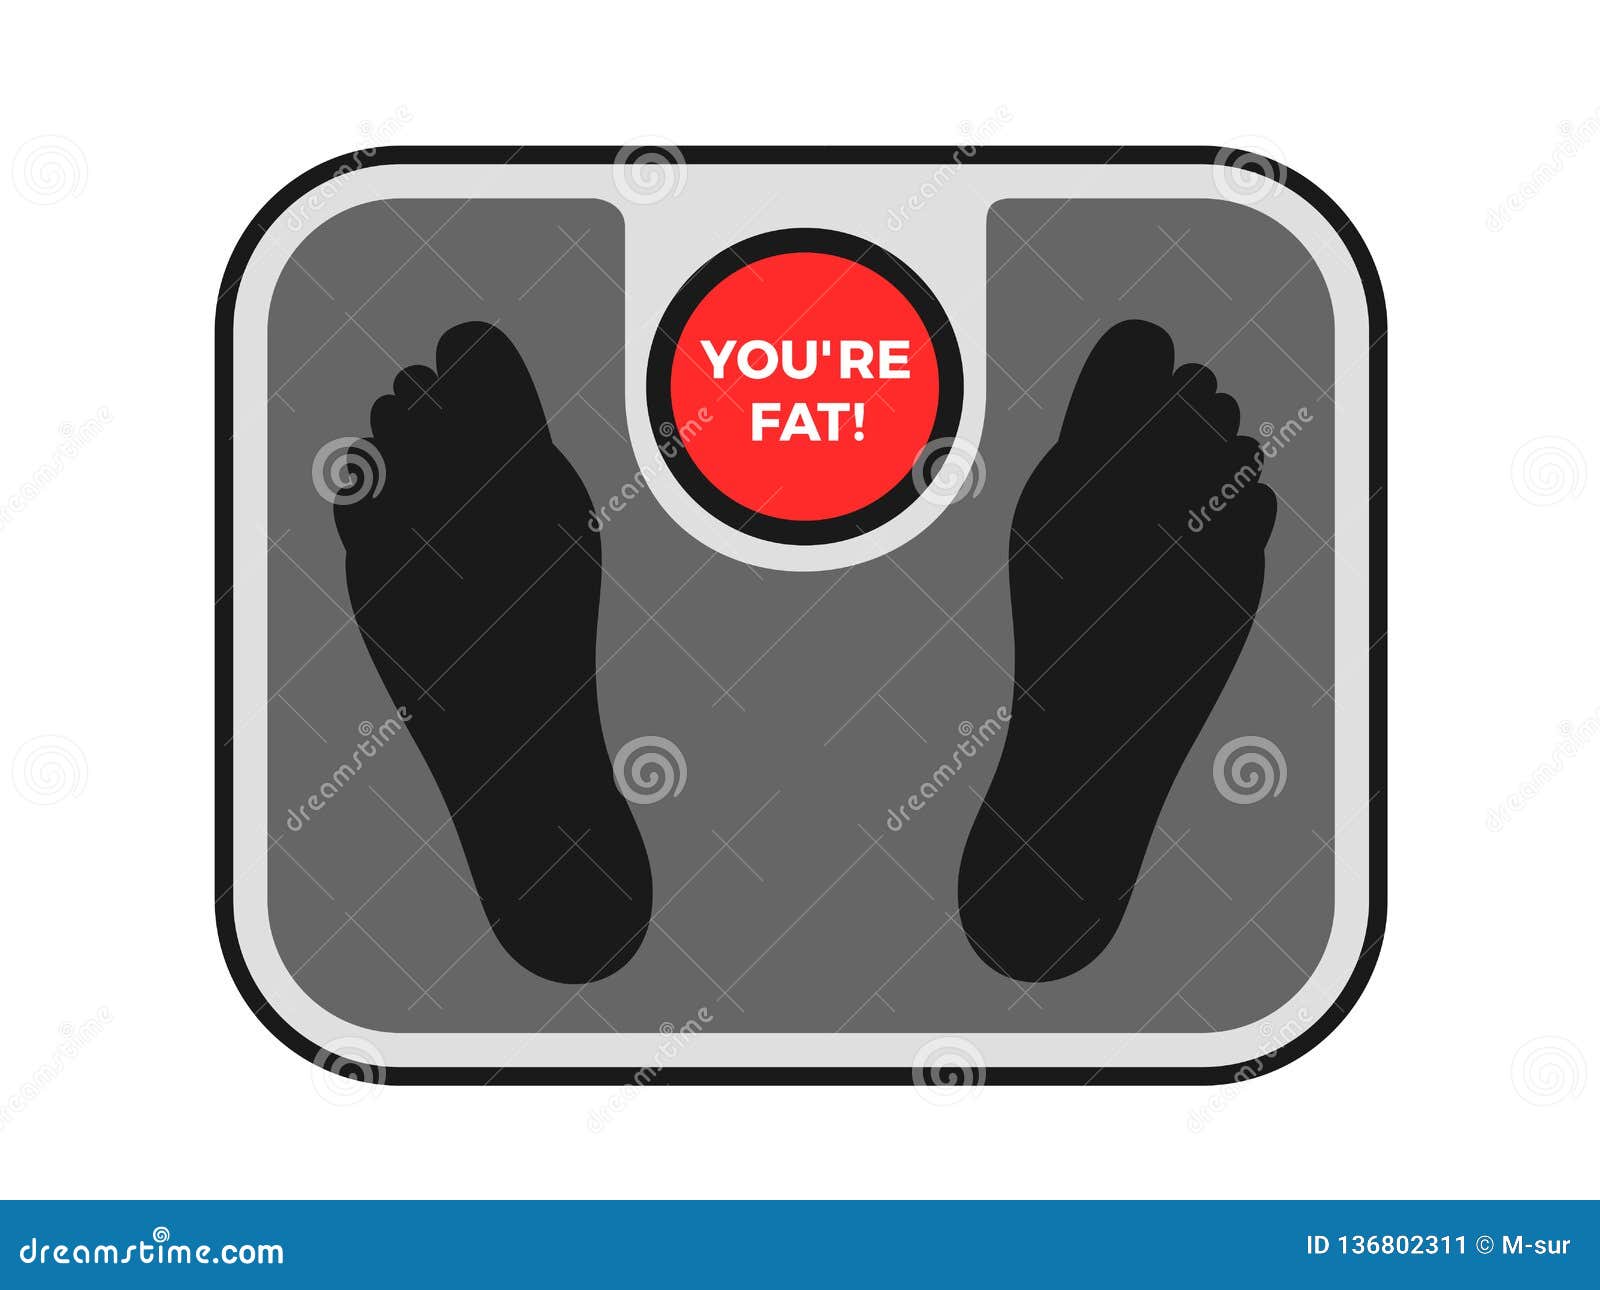 weighing machine is doing offensive body shaming assault - fat and overweight person is accused of obesity